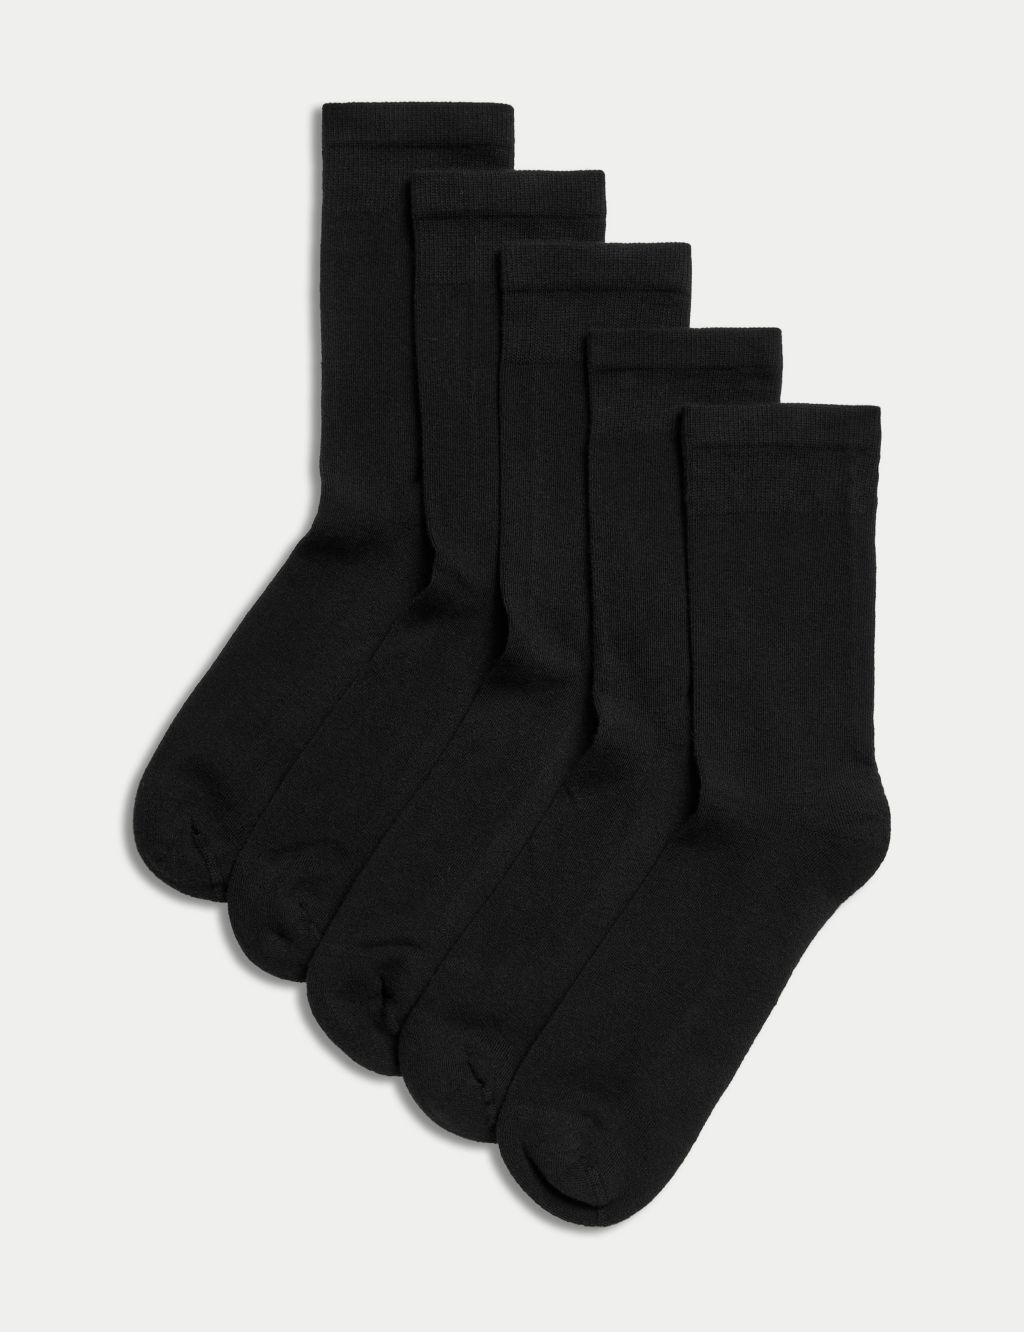 5pk Cotton Rich Ultimate Comfort Ankle High Socks image 1